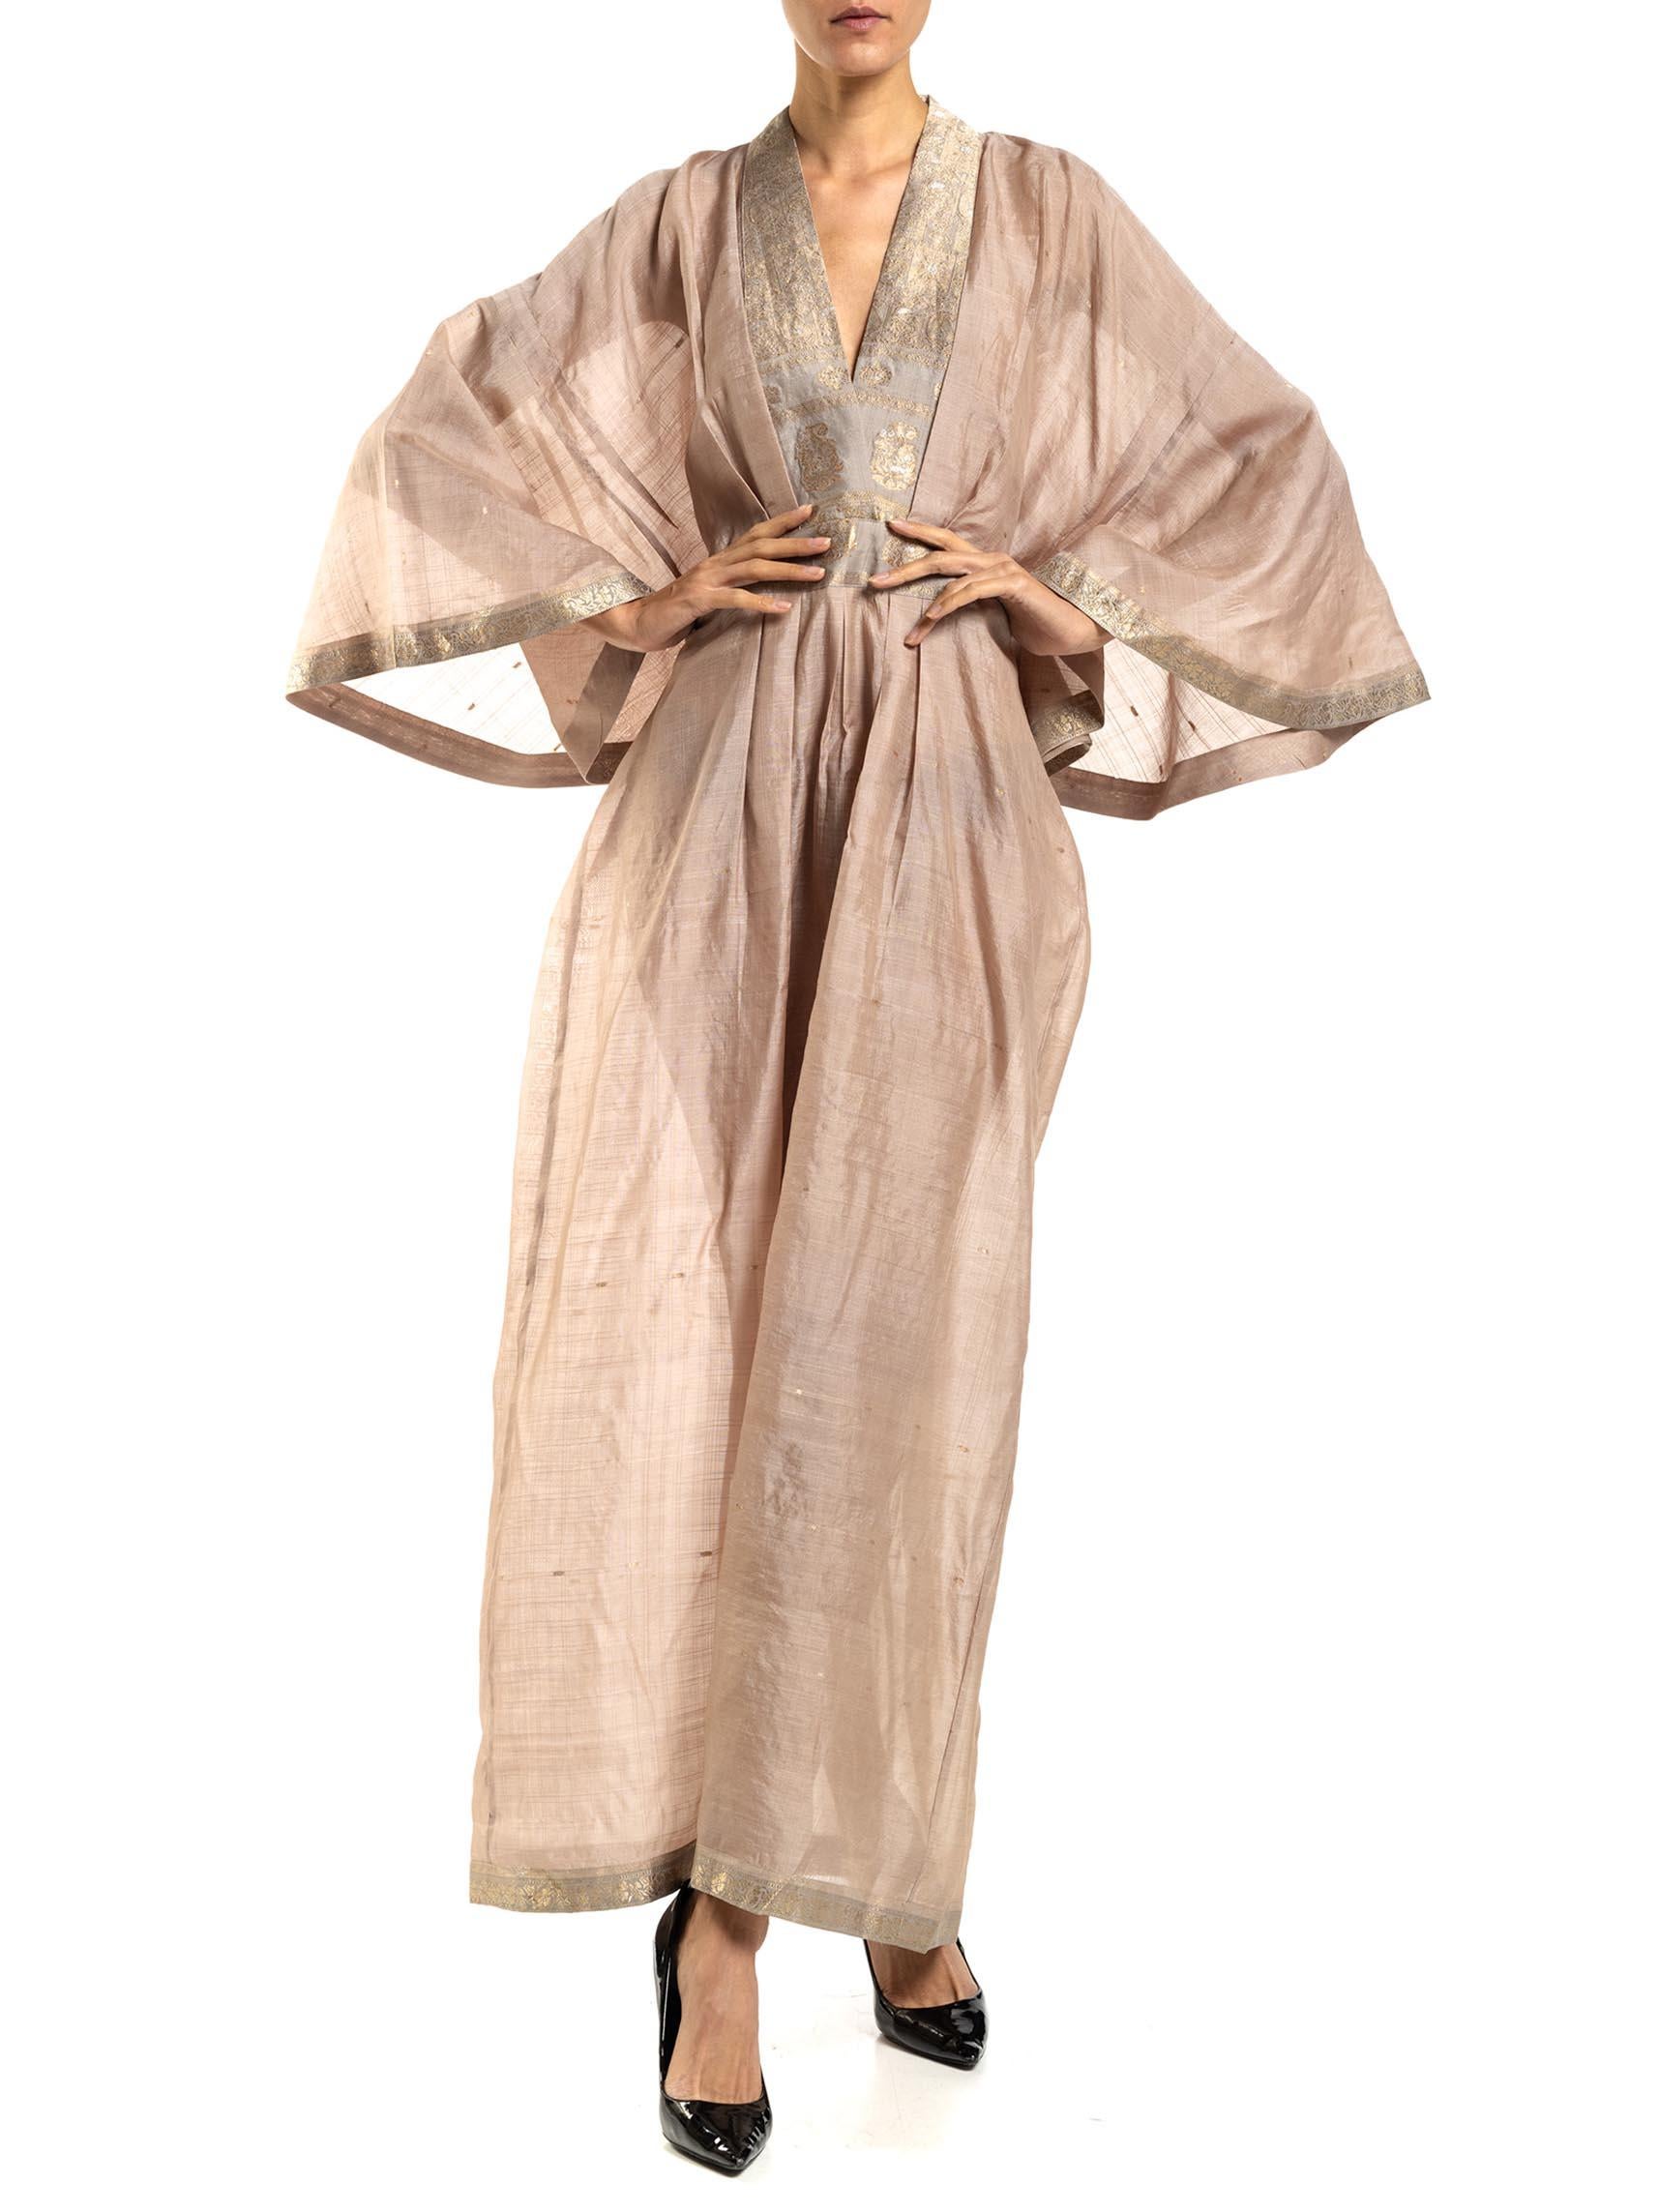 MORPHEW COLLECTION Dusty Pink Silk Kaftan Made From Vintage Sari For Sale 1